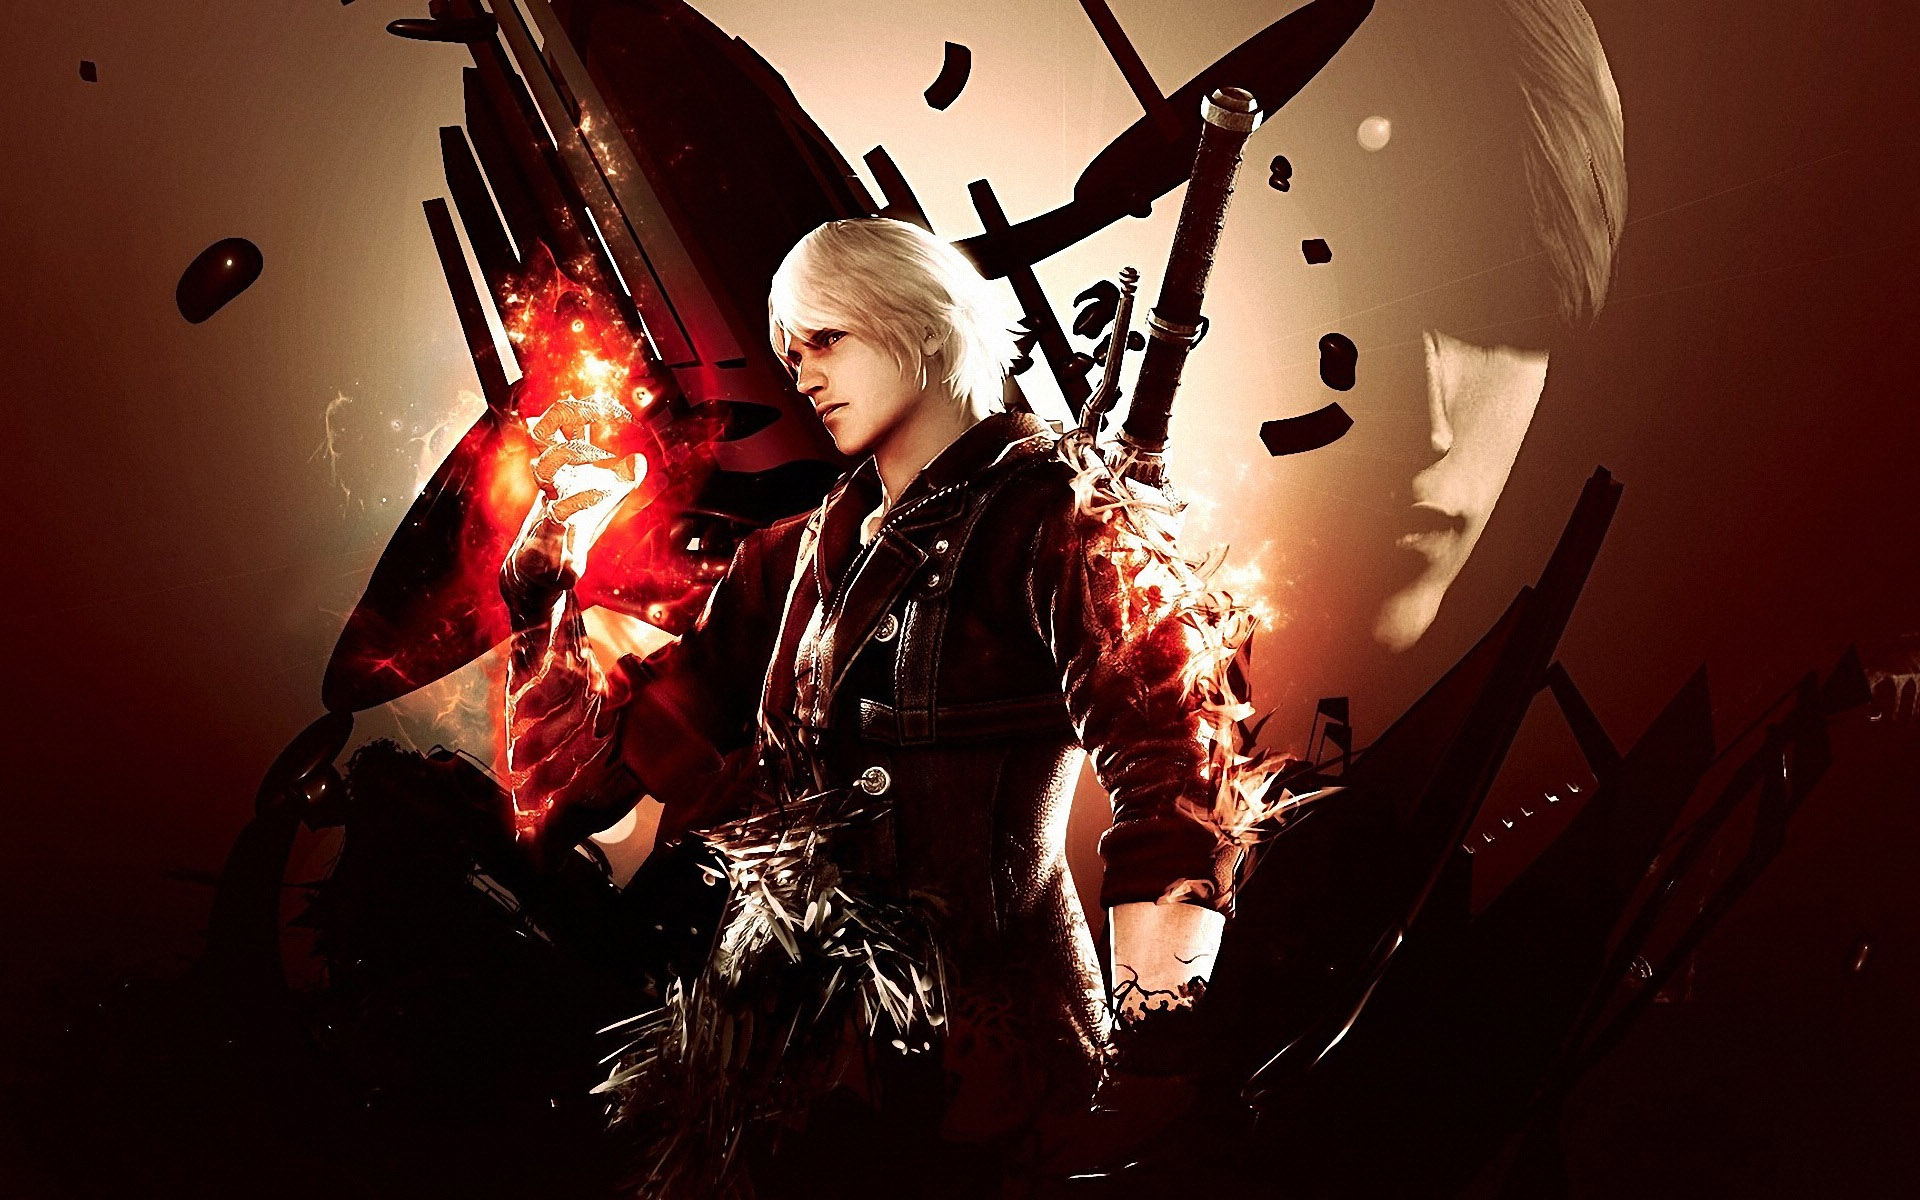 Devil May Cry 5 Wallpaper HD Images #0y0ht0r6 – Yoanu